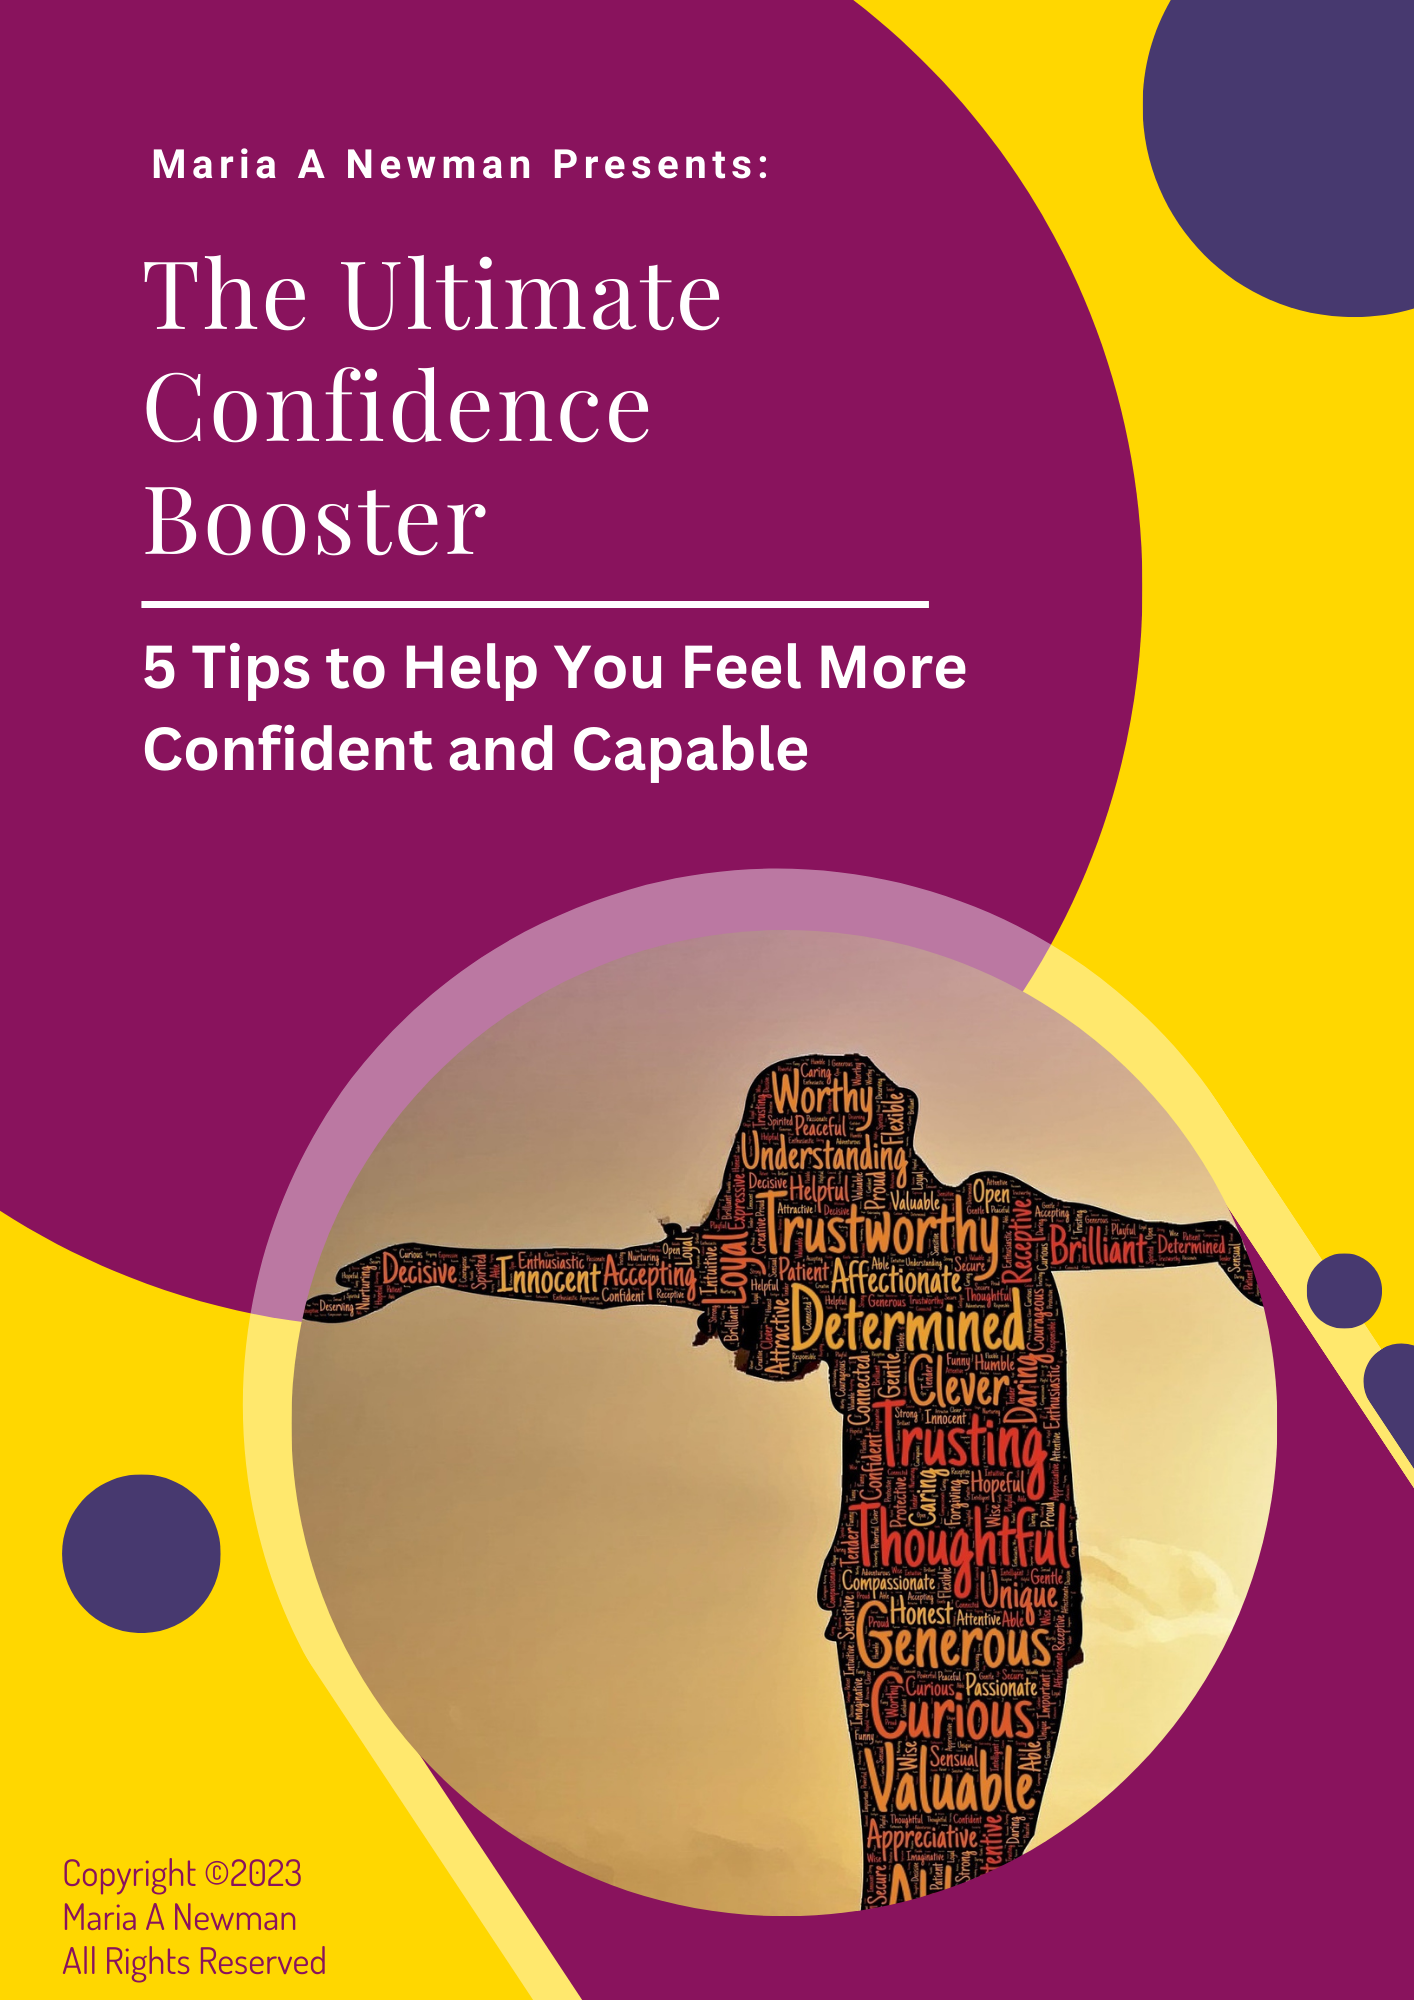 Five tips that will increase your confidence